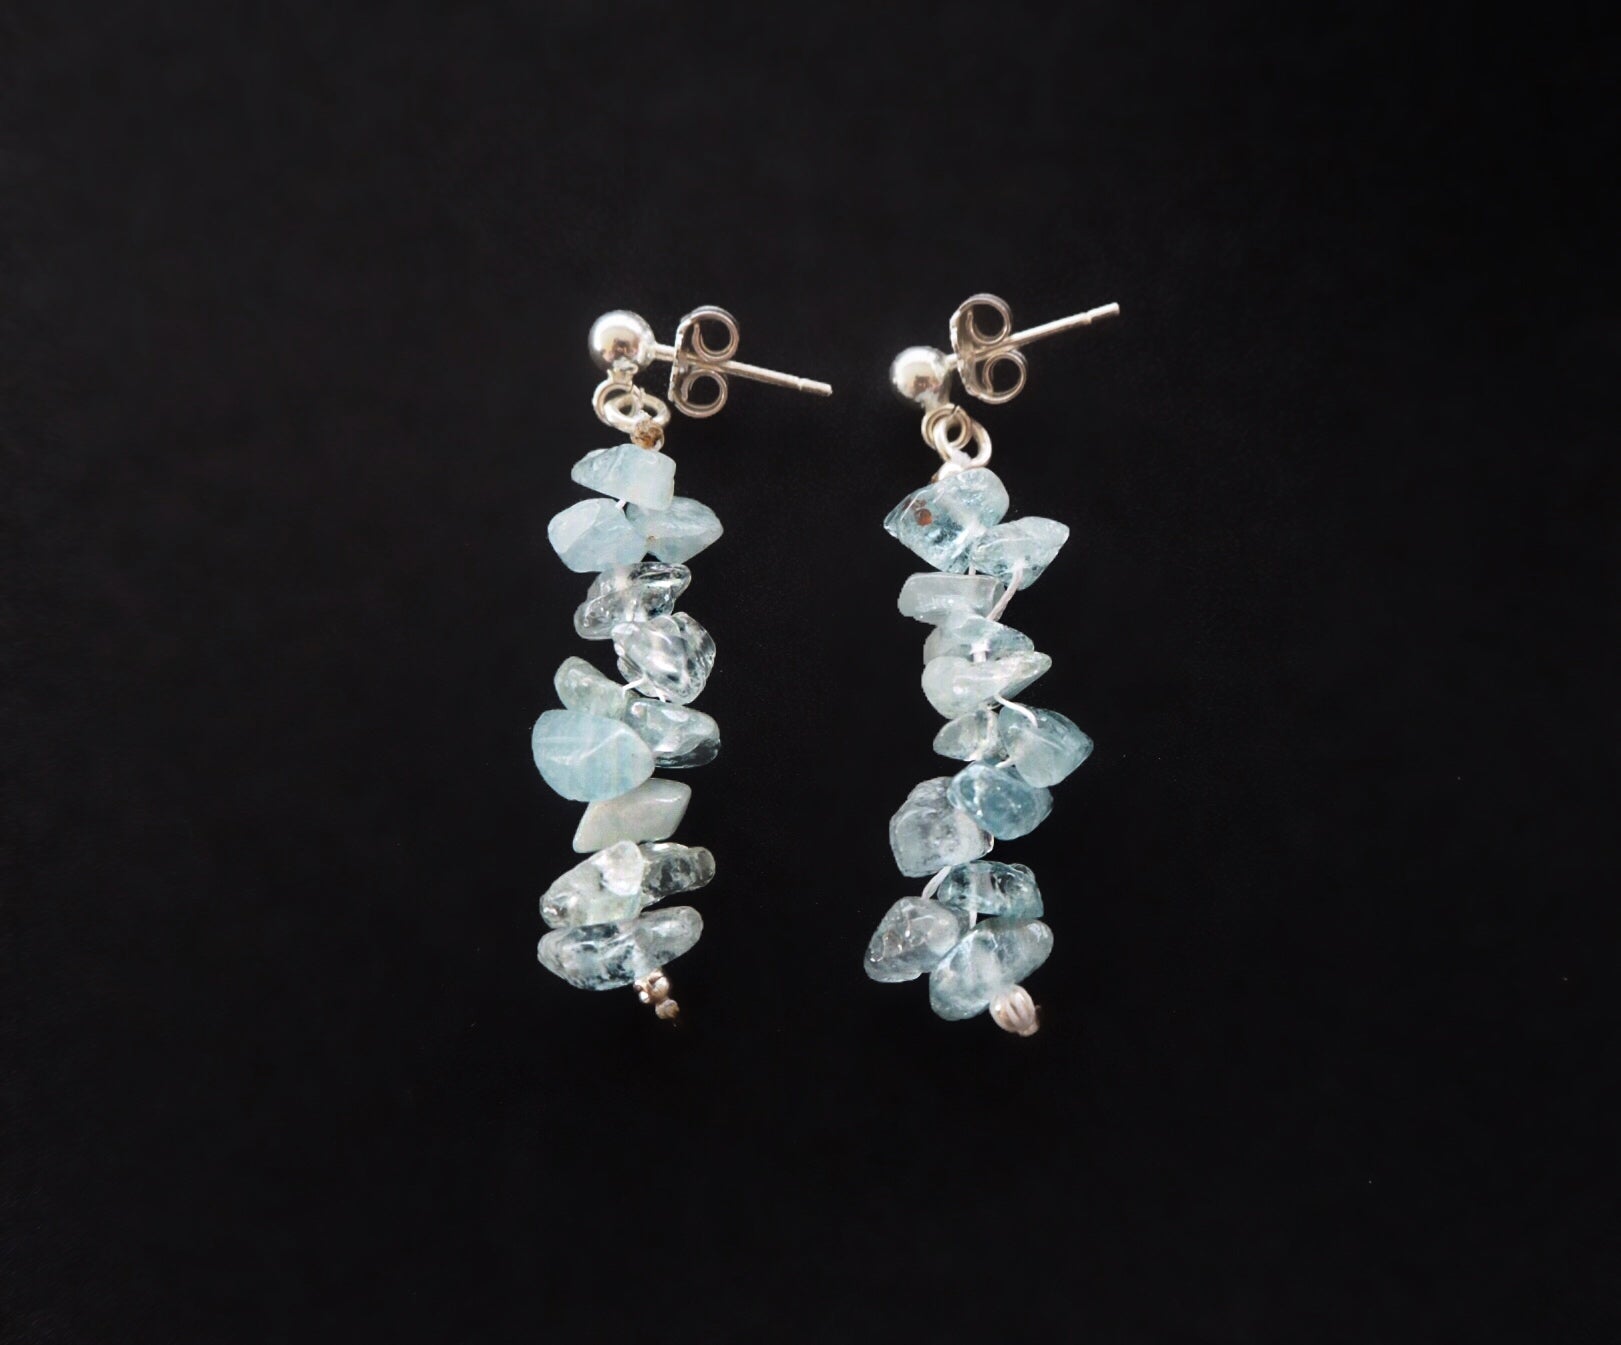 Aquamarine chips and silver earrings